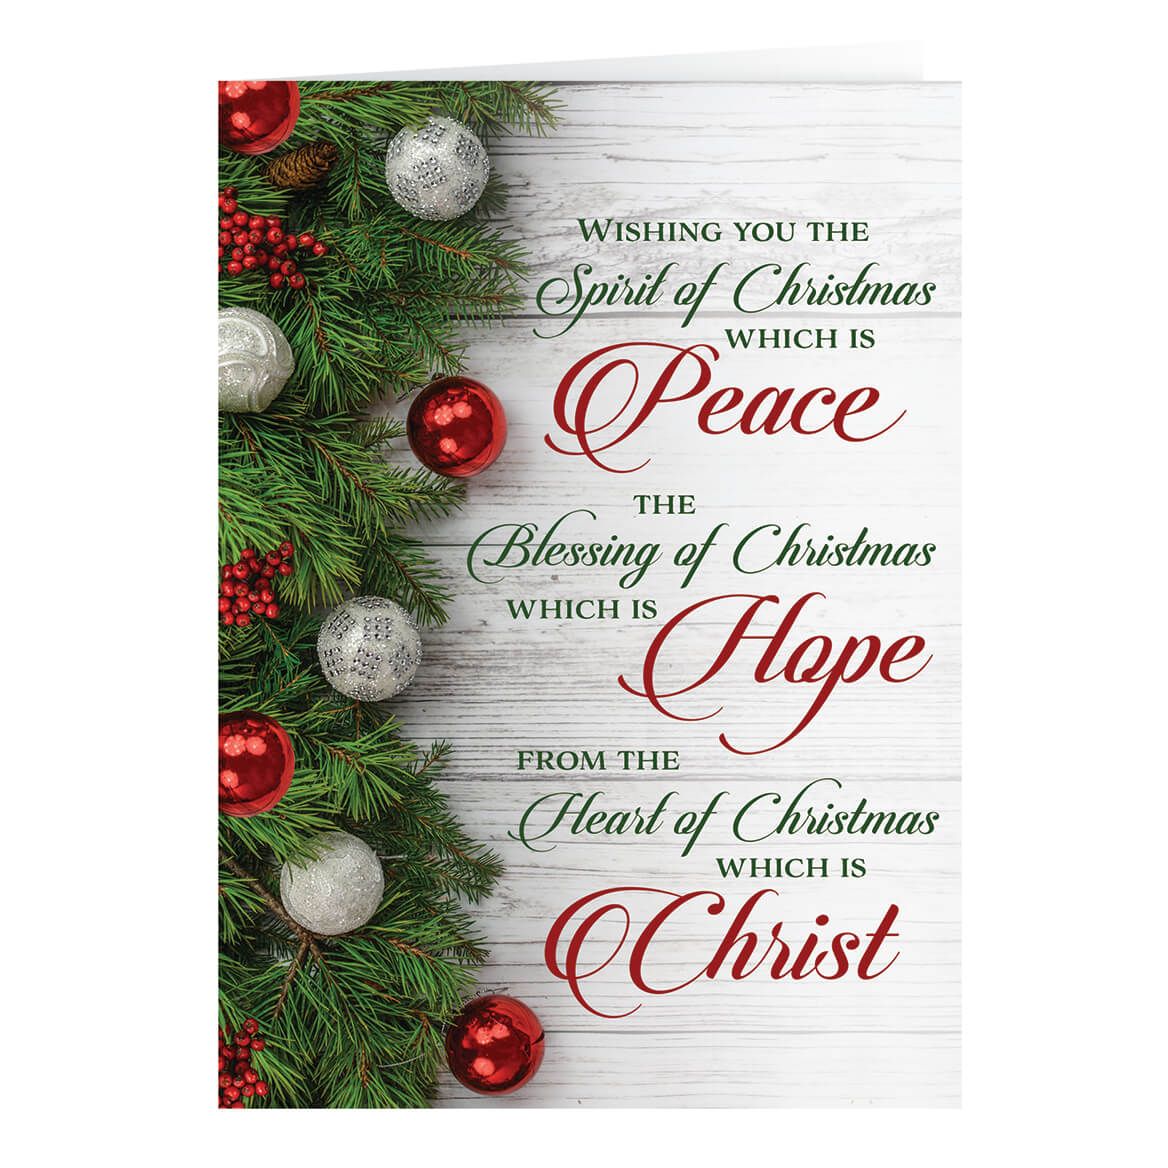 Peace, Hope, Christ Personalized Christmas Cards - 20 - Miles Kimball